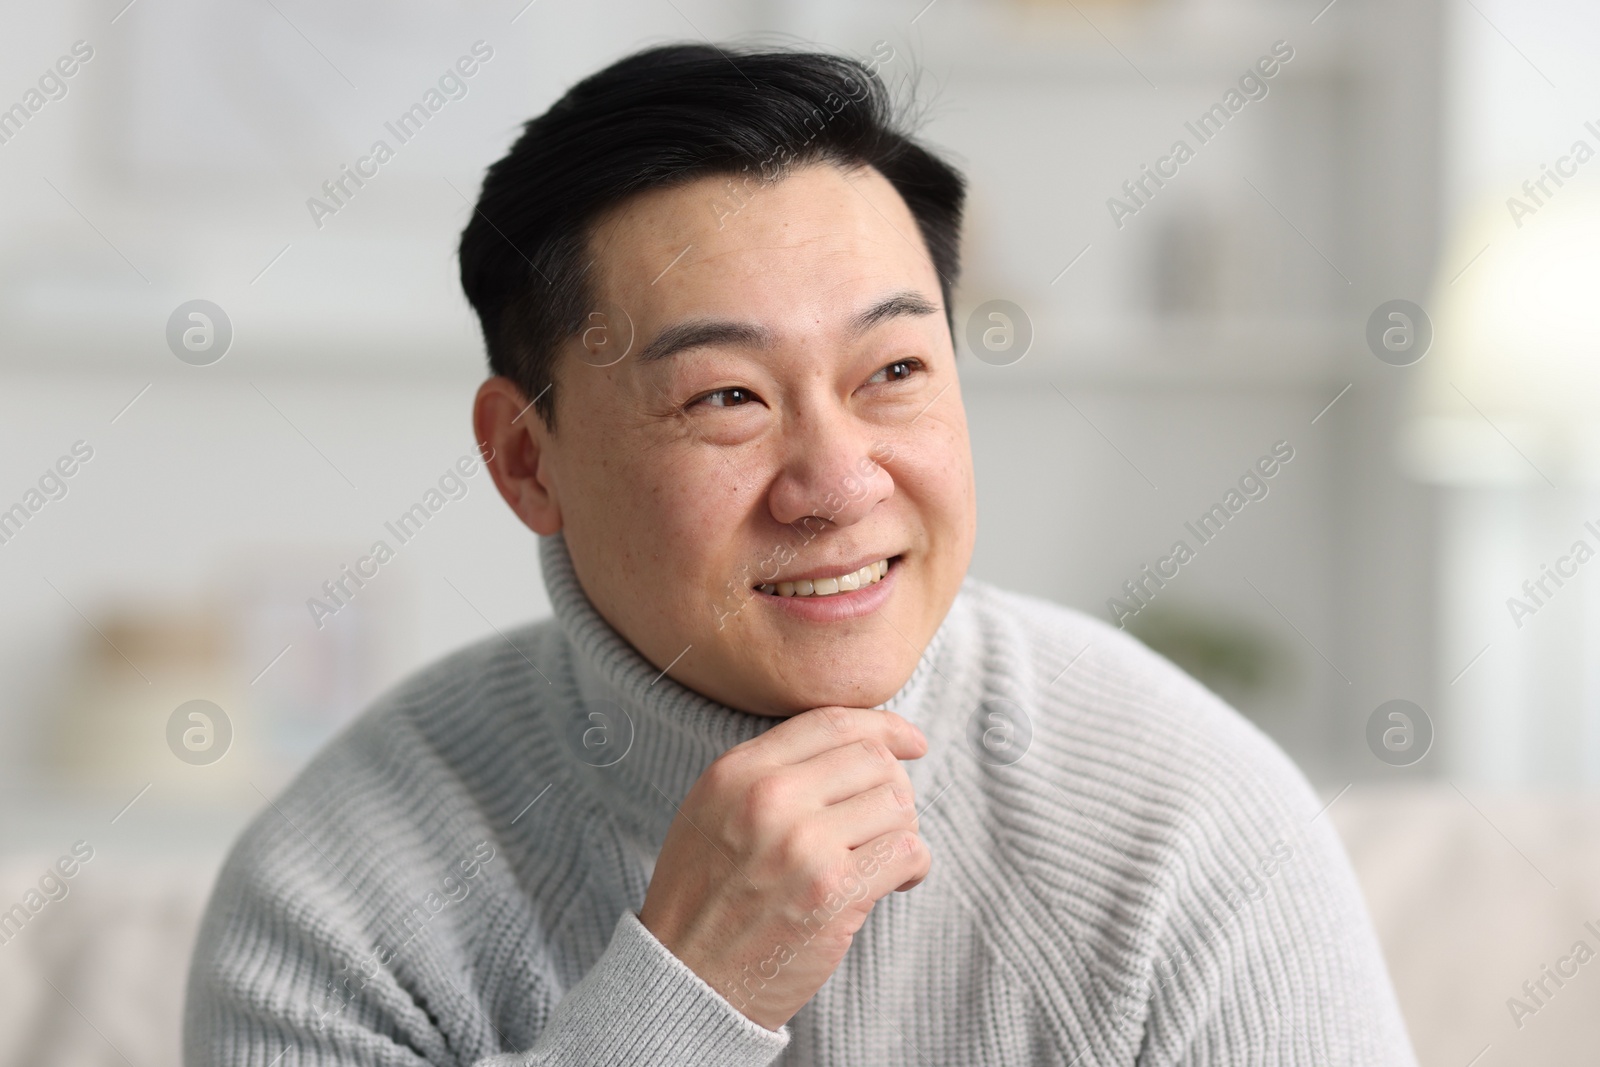 Photo of Portrait of smiling man on blurred background